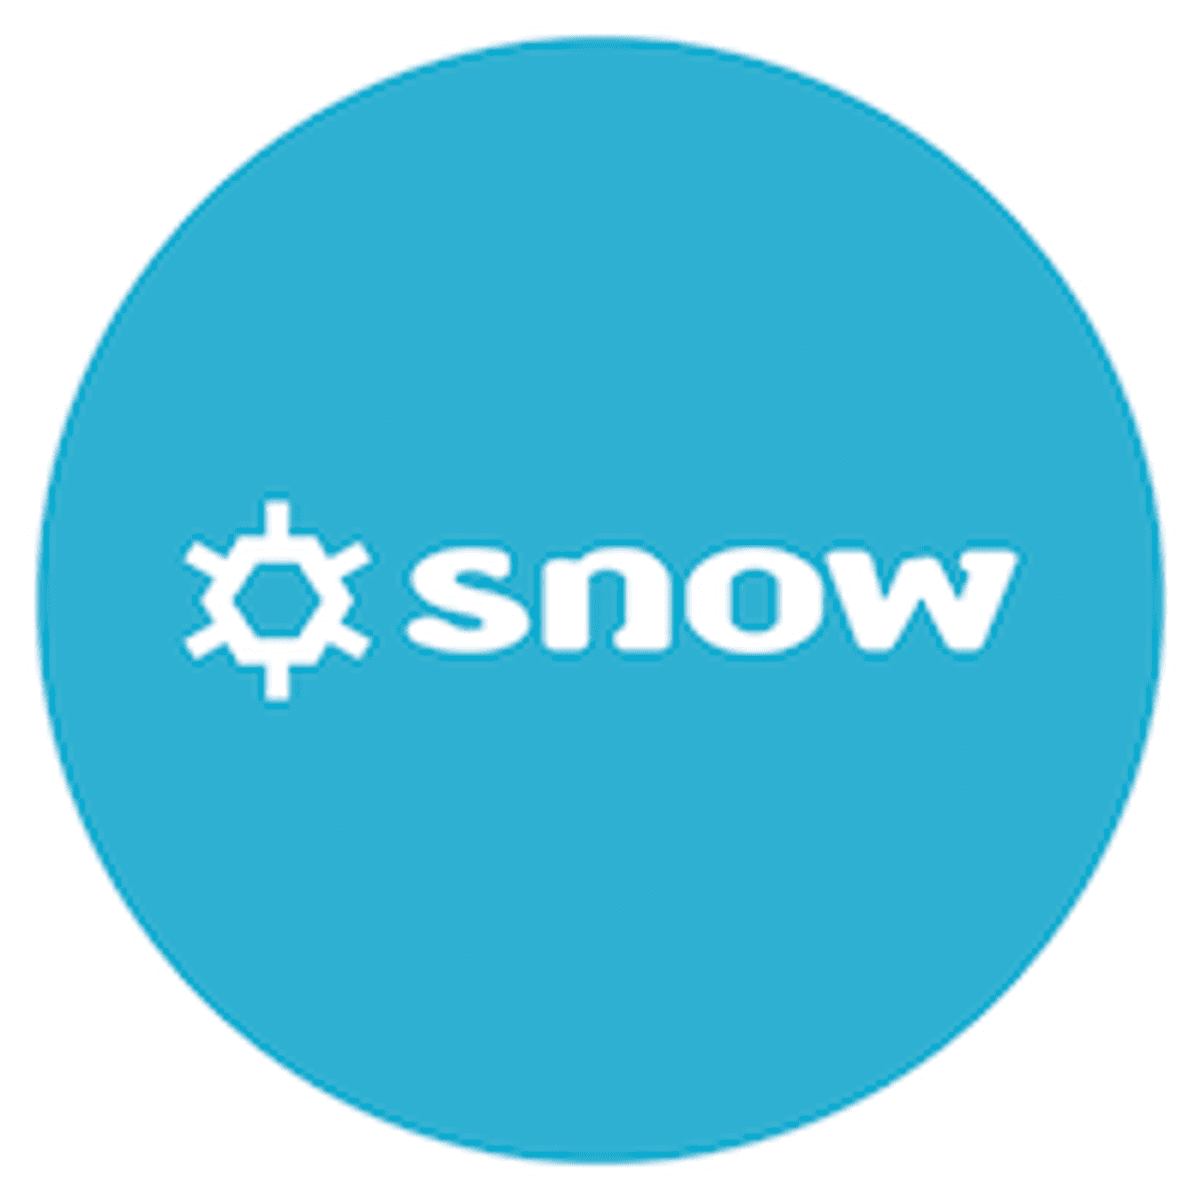 Snow Software stelt Vishal Rao aan als President & Chief Operating Officer image